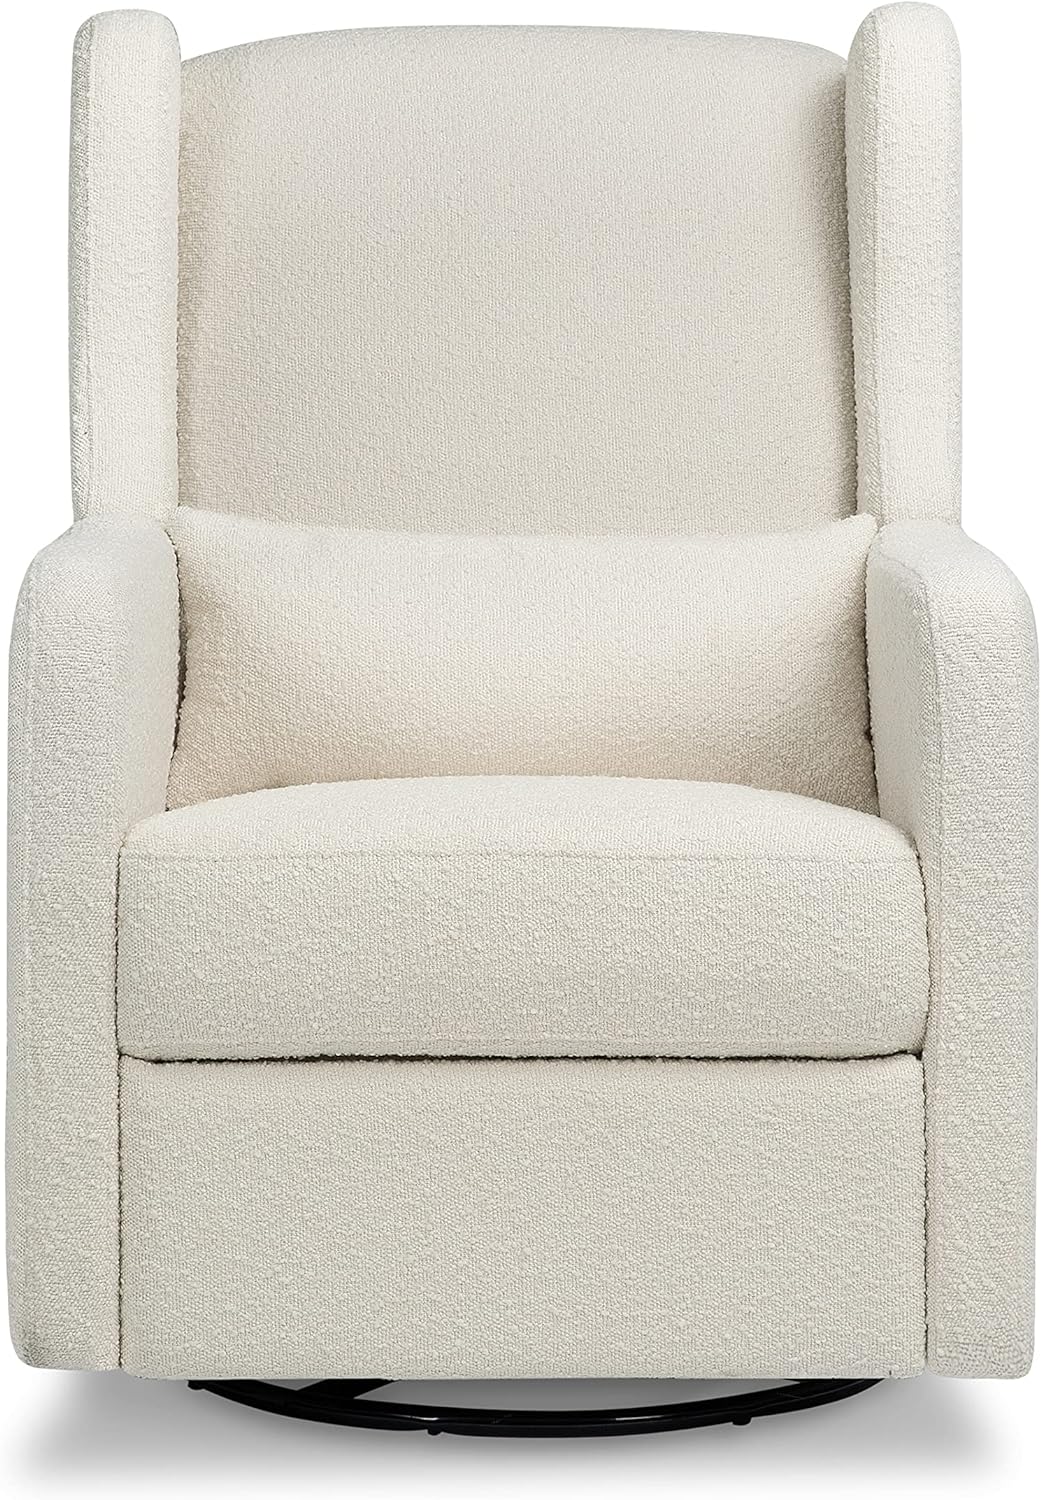 DaVinci Carter's Arlo Recliner and Swivel Glider, Water Repellent & Stain Resistant, Greenguard Gold & CertiPUR-US Certified, Performance Cream Linen